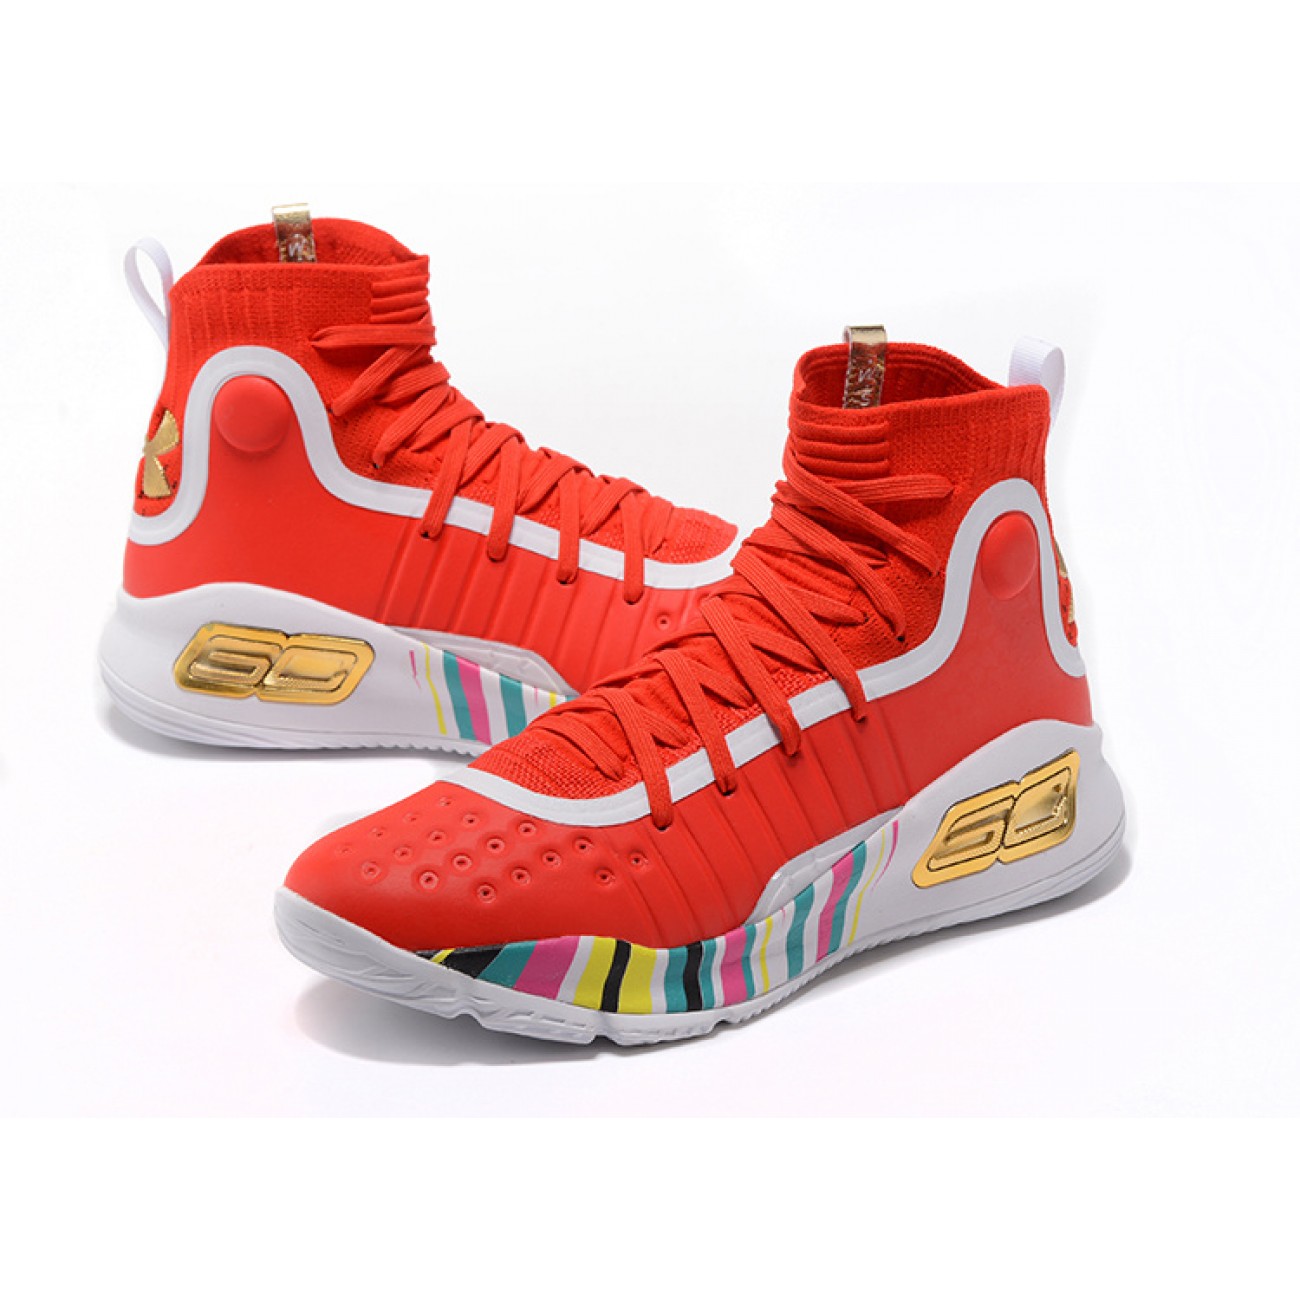 Under Armour UA Curry 4 "The Year of Rooster" Red/Gold